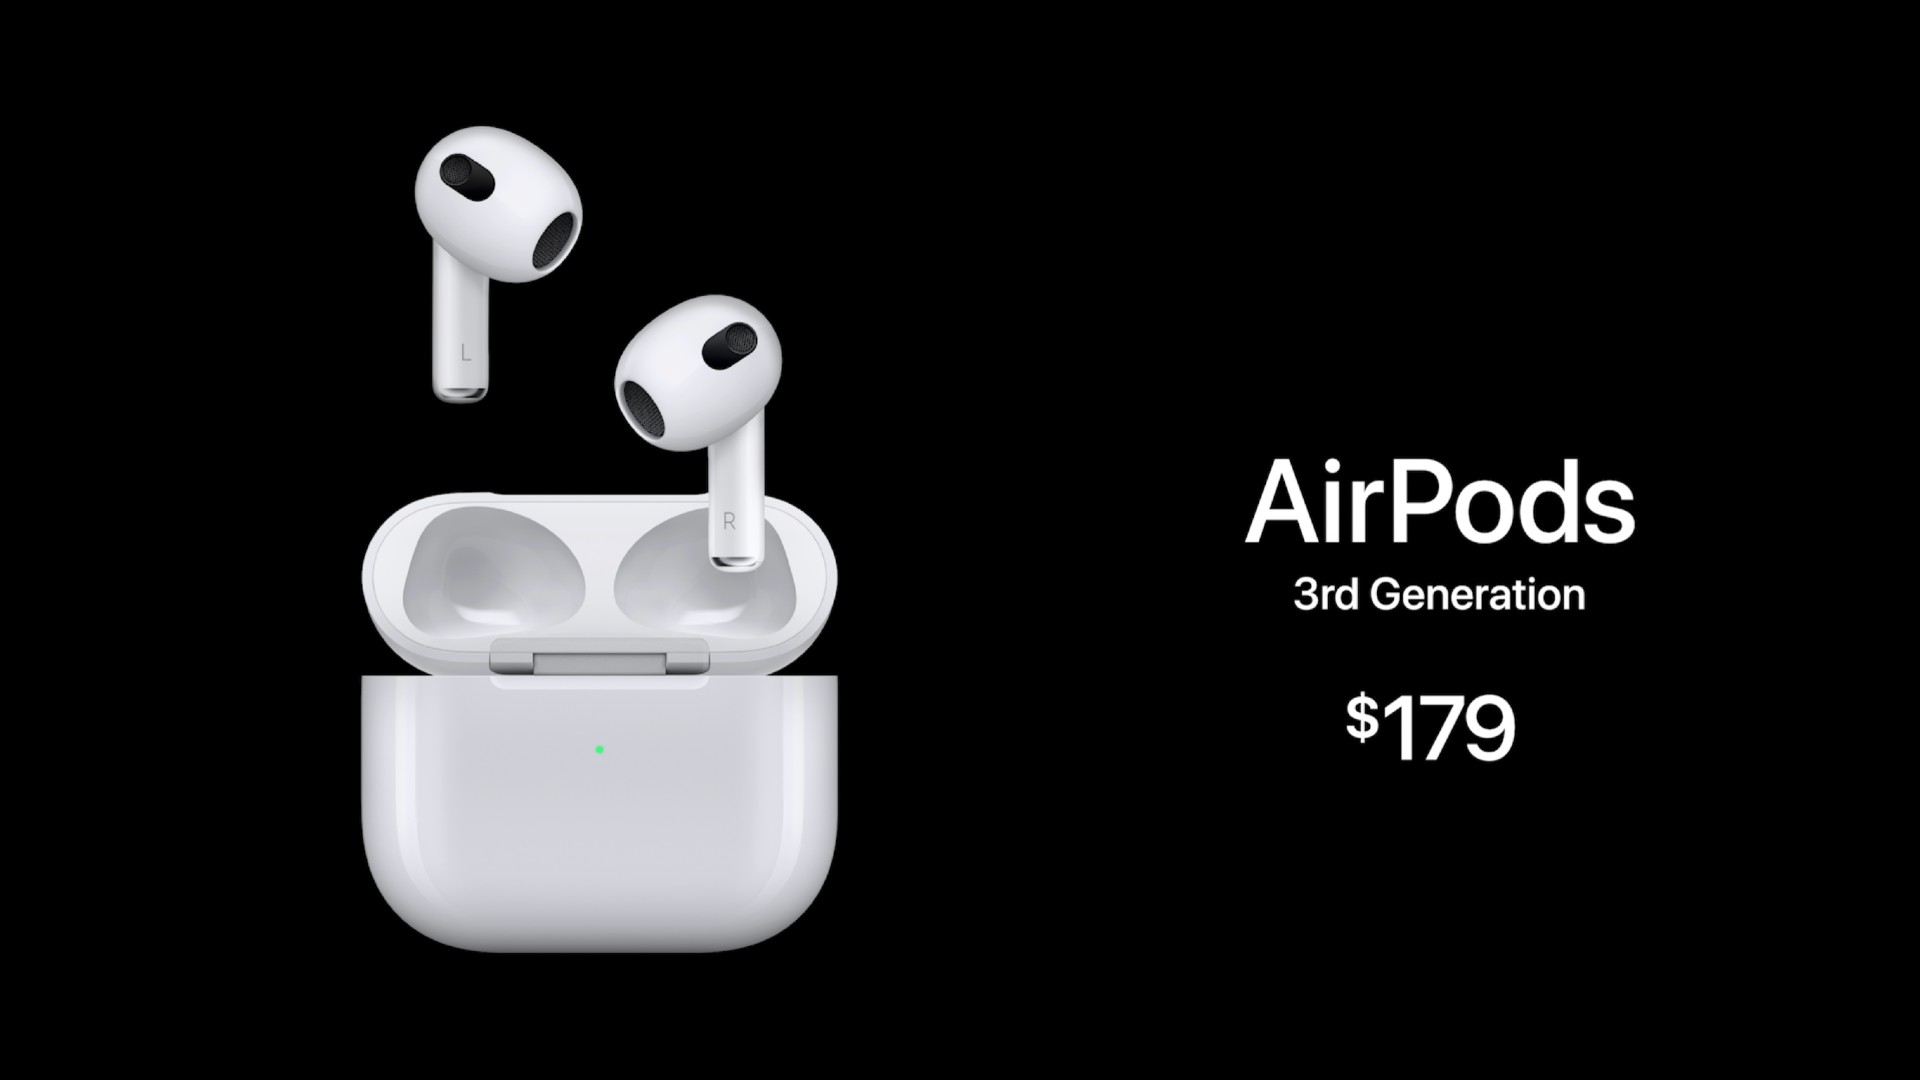 succes tiltrækkende Bangladesh AirPods 3 are official, support Dolby Atmos spatial audio with head  tracking | What Hi-Fi?